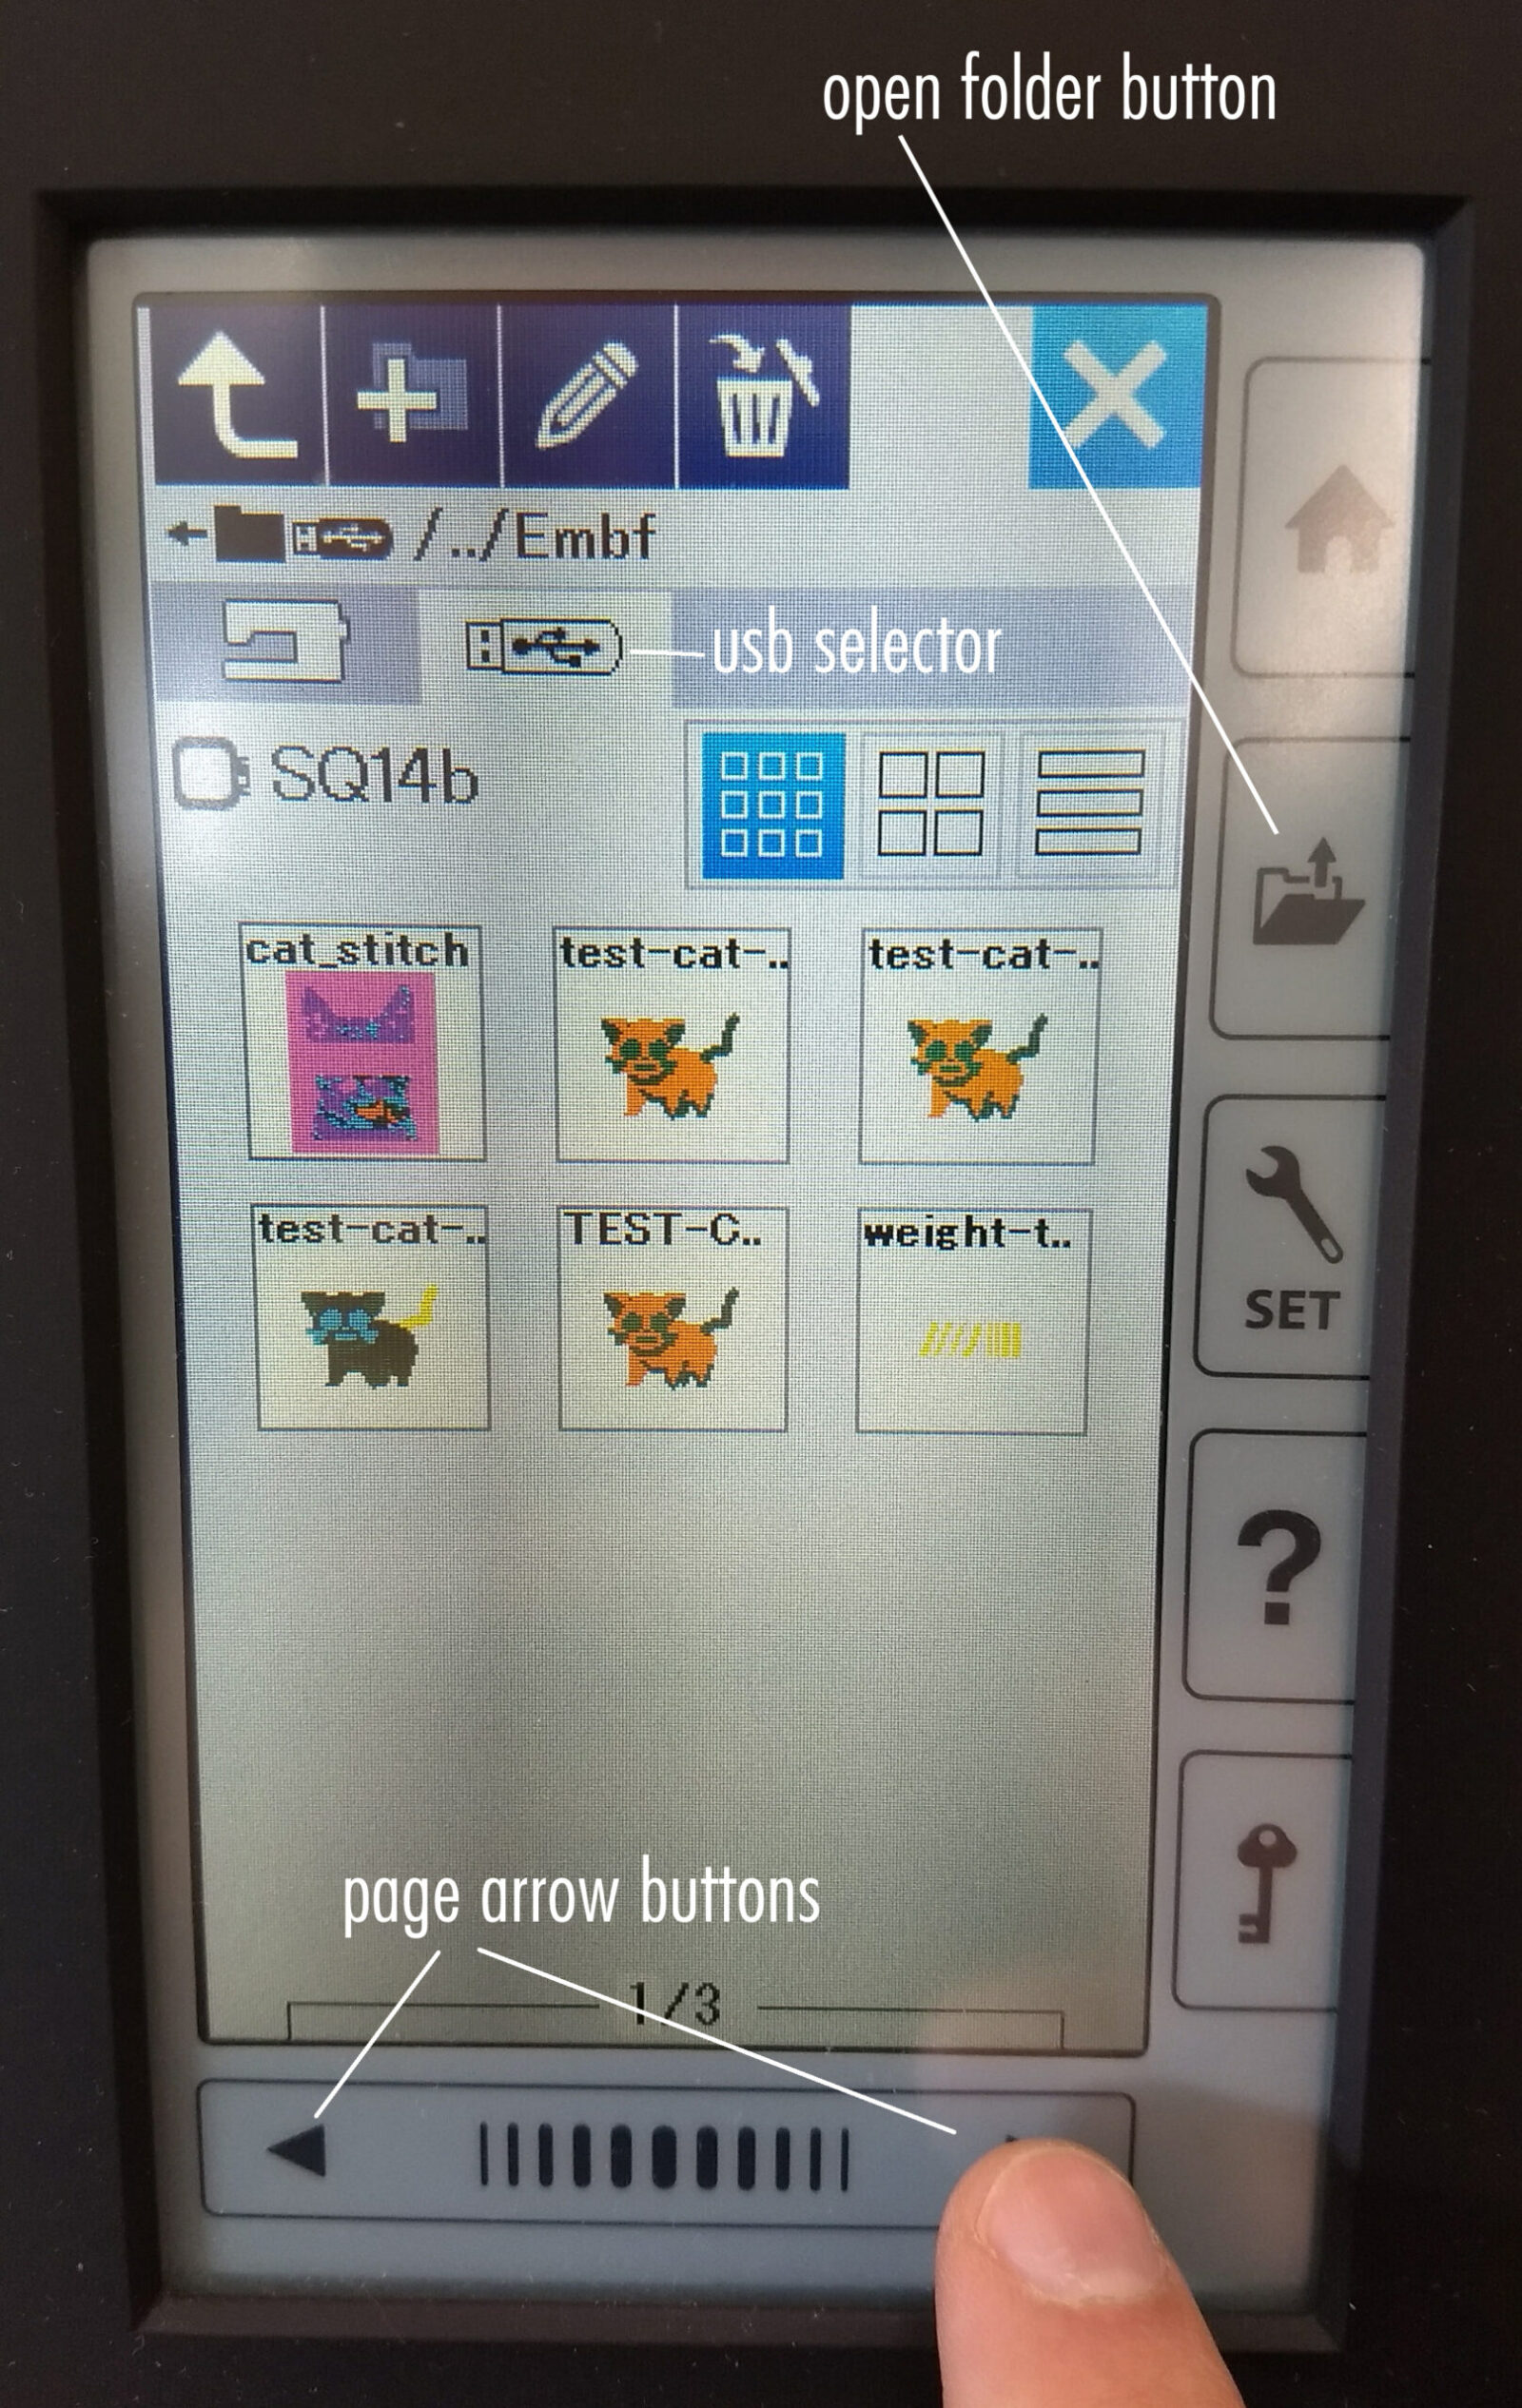 File navigation on the Embroidery Machine